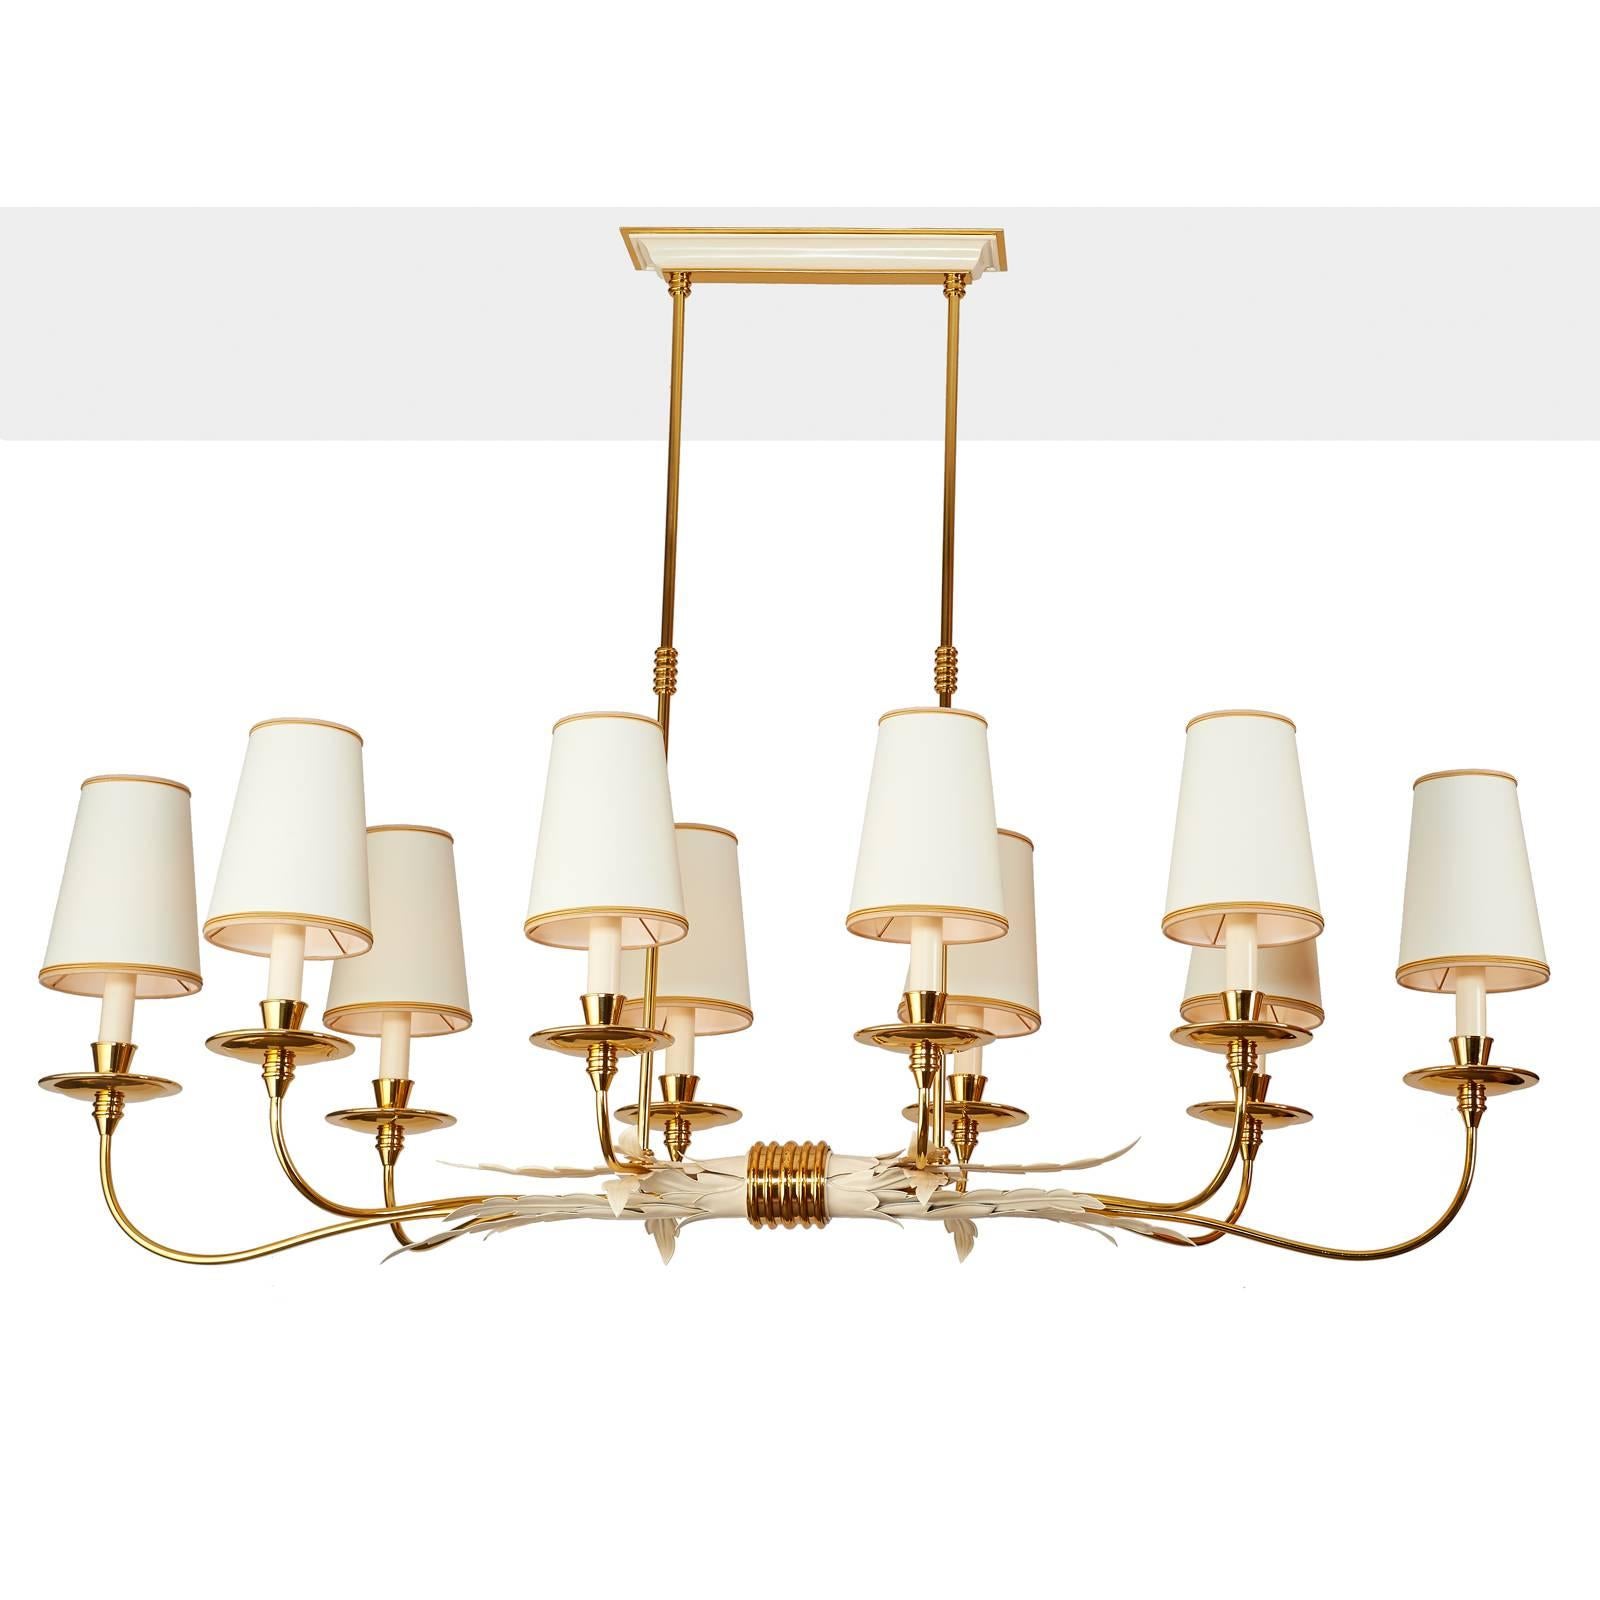 Italy, 1950s.
An elegant ten branch chandelier with rich foliate decor, polished ringed brass mounts at center gathering and on shafts.
Rewired for use in the USA.
58 x 21 x 42 H (Height adjustable).